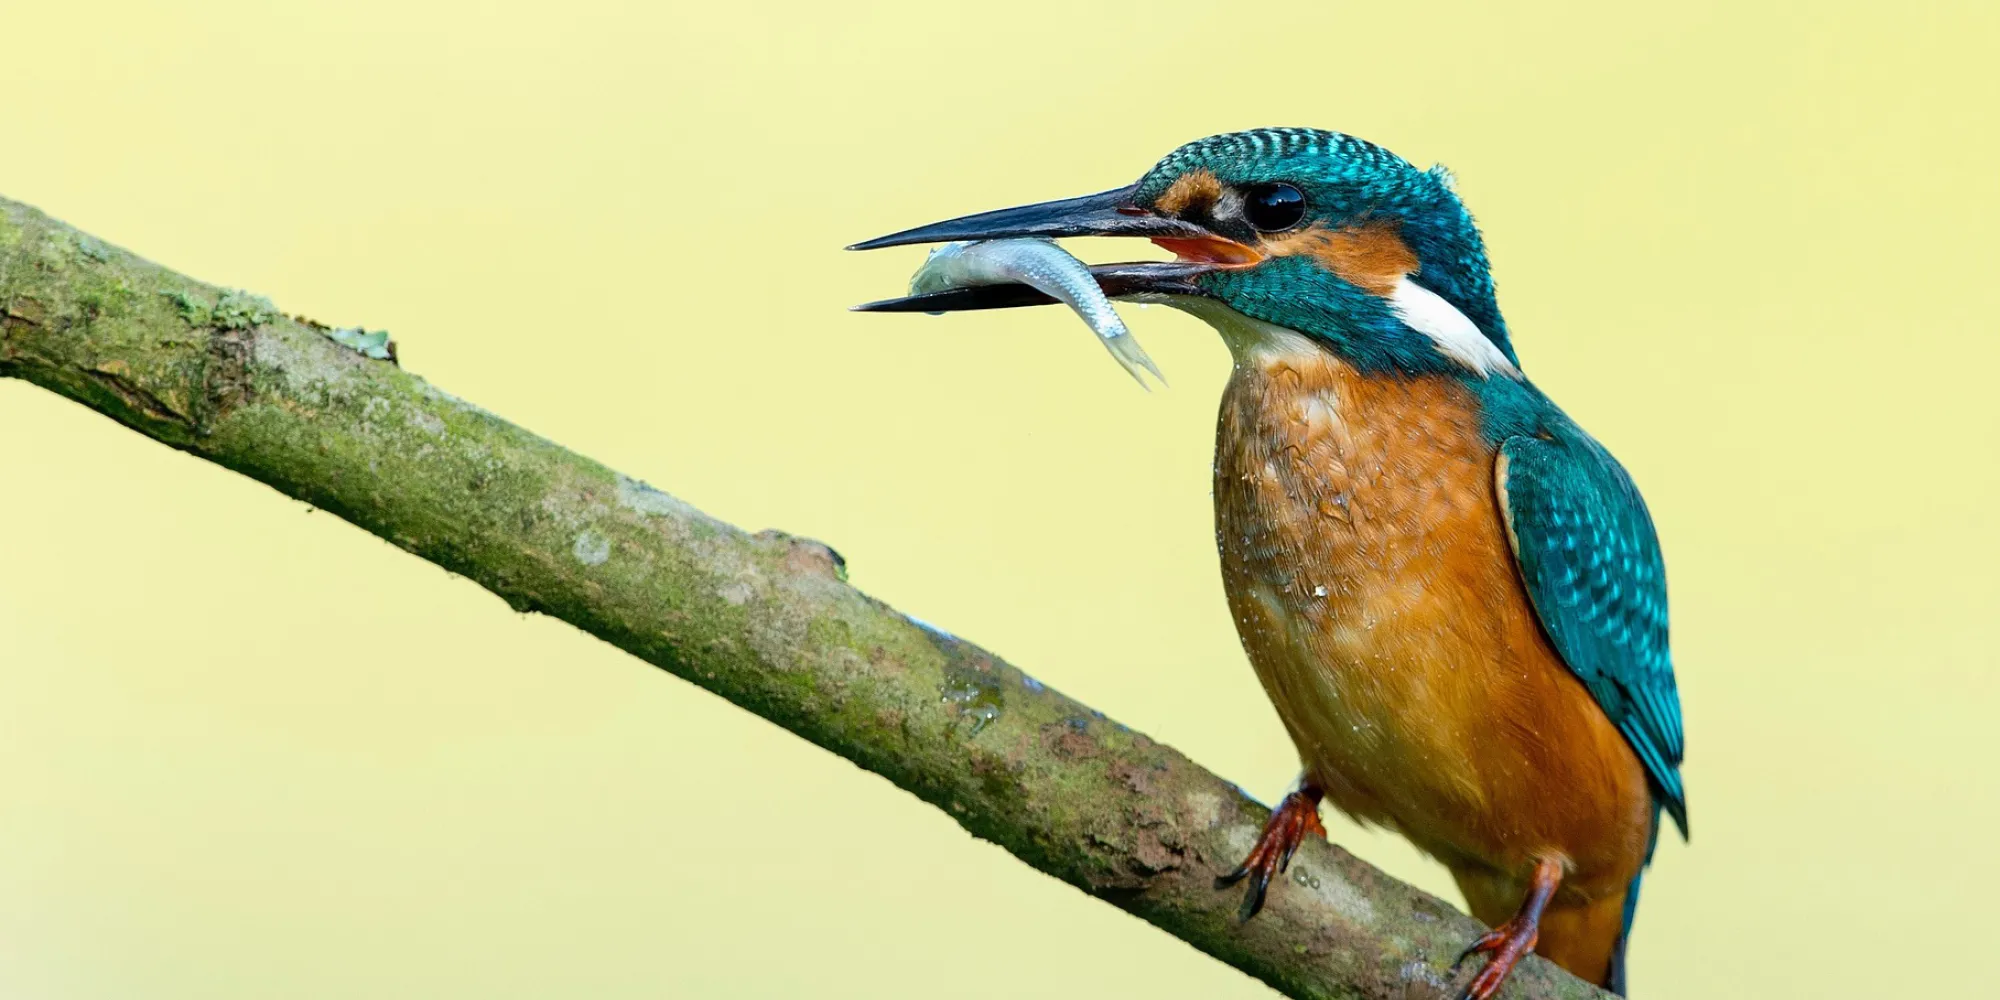 a kingfisher sits with a fish in mouth